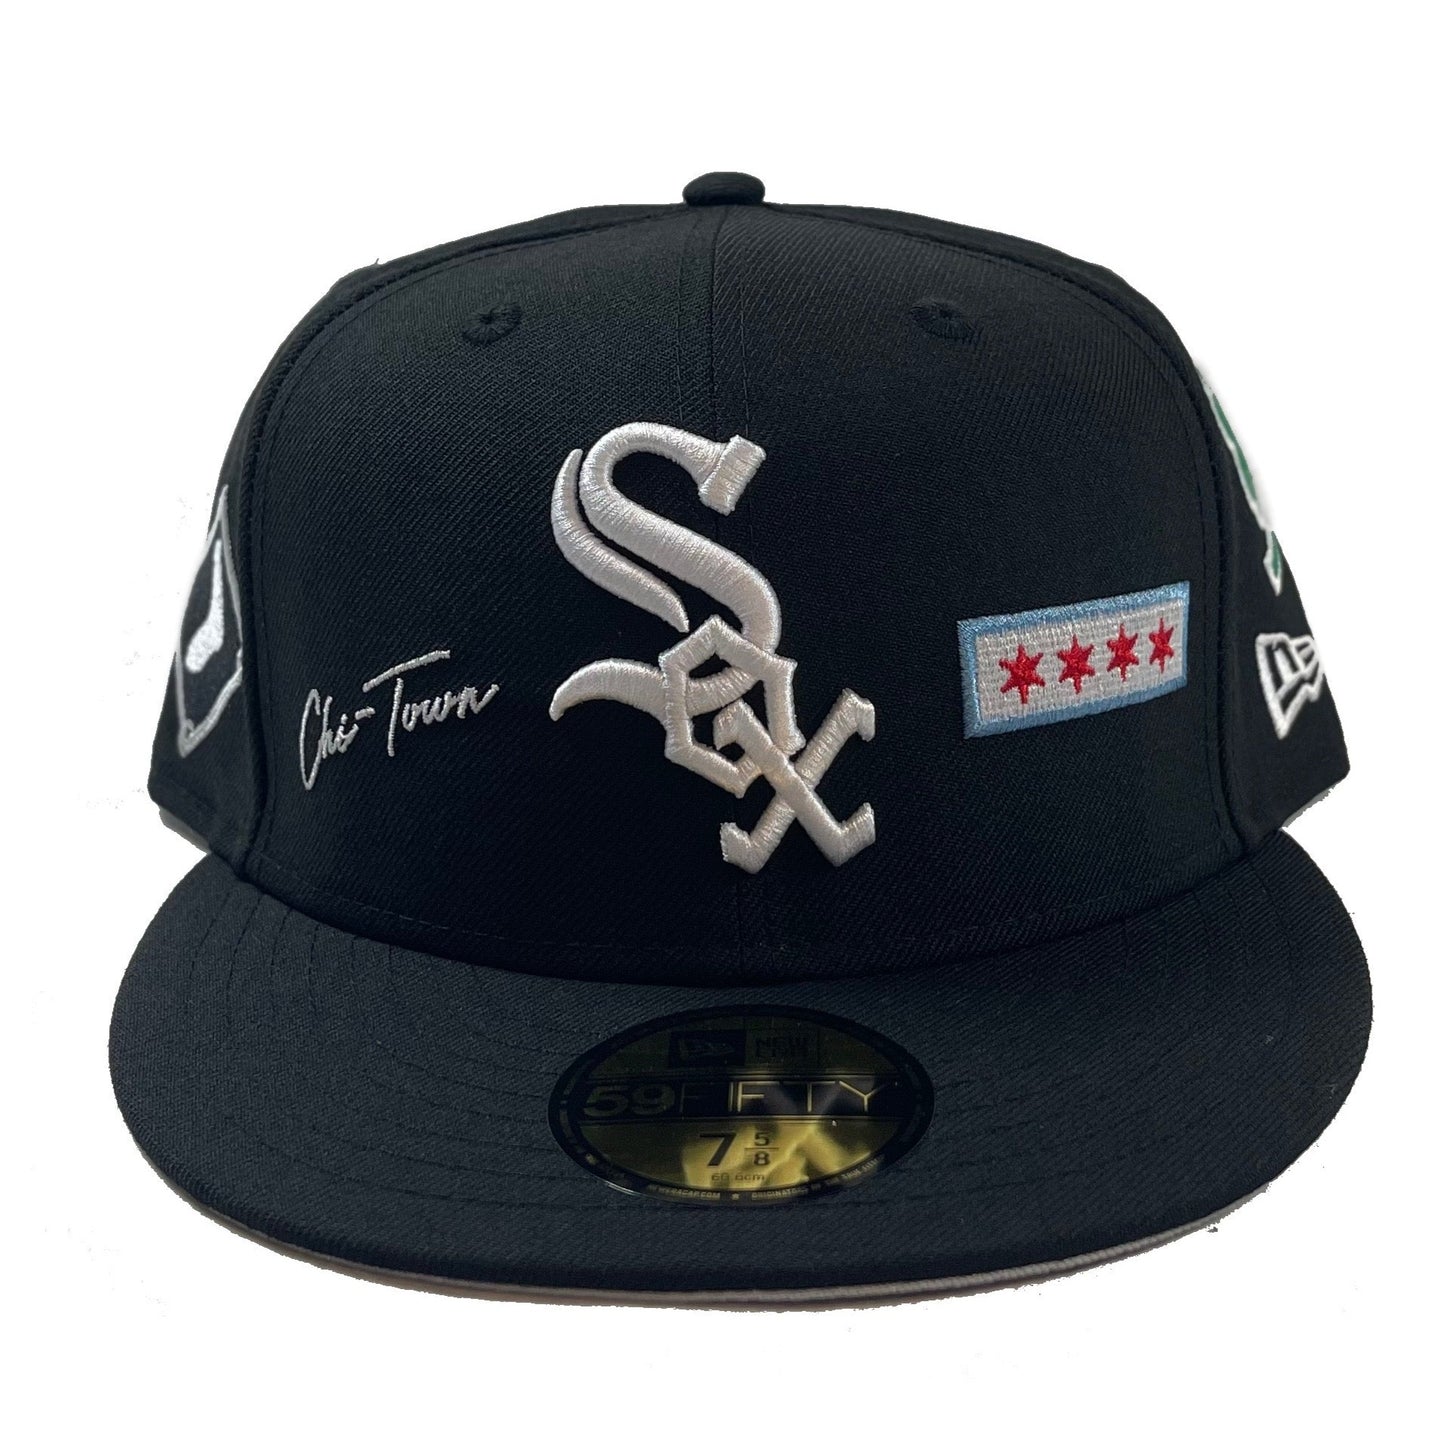 Chicago White Sox Patches (Black) Fitted